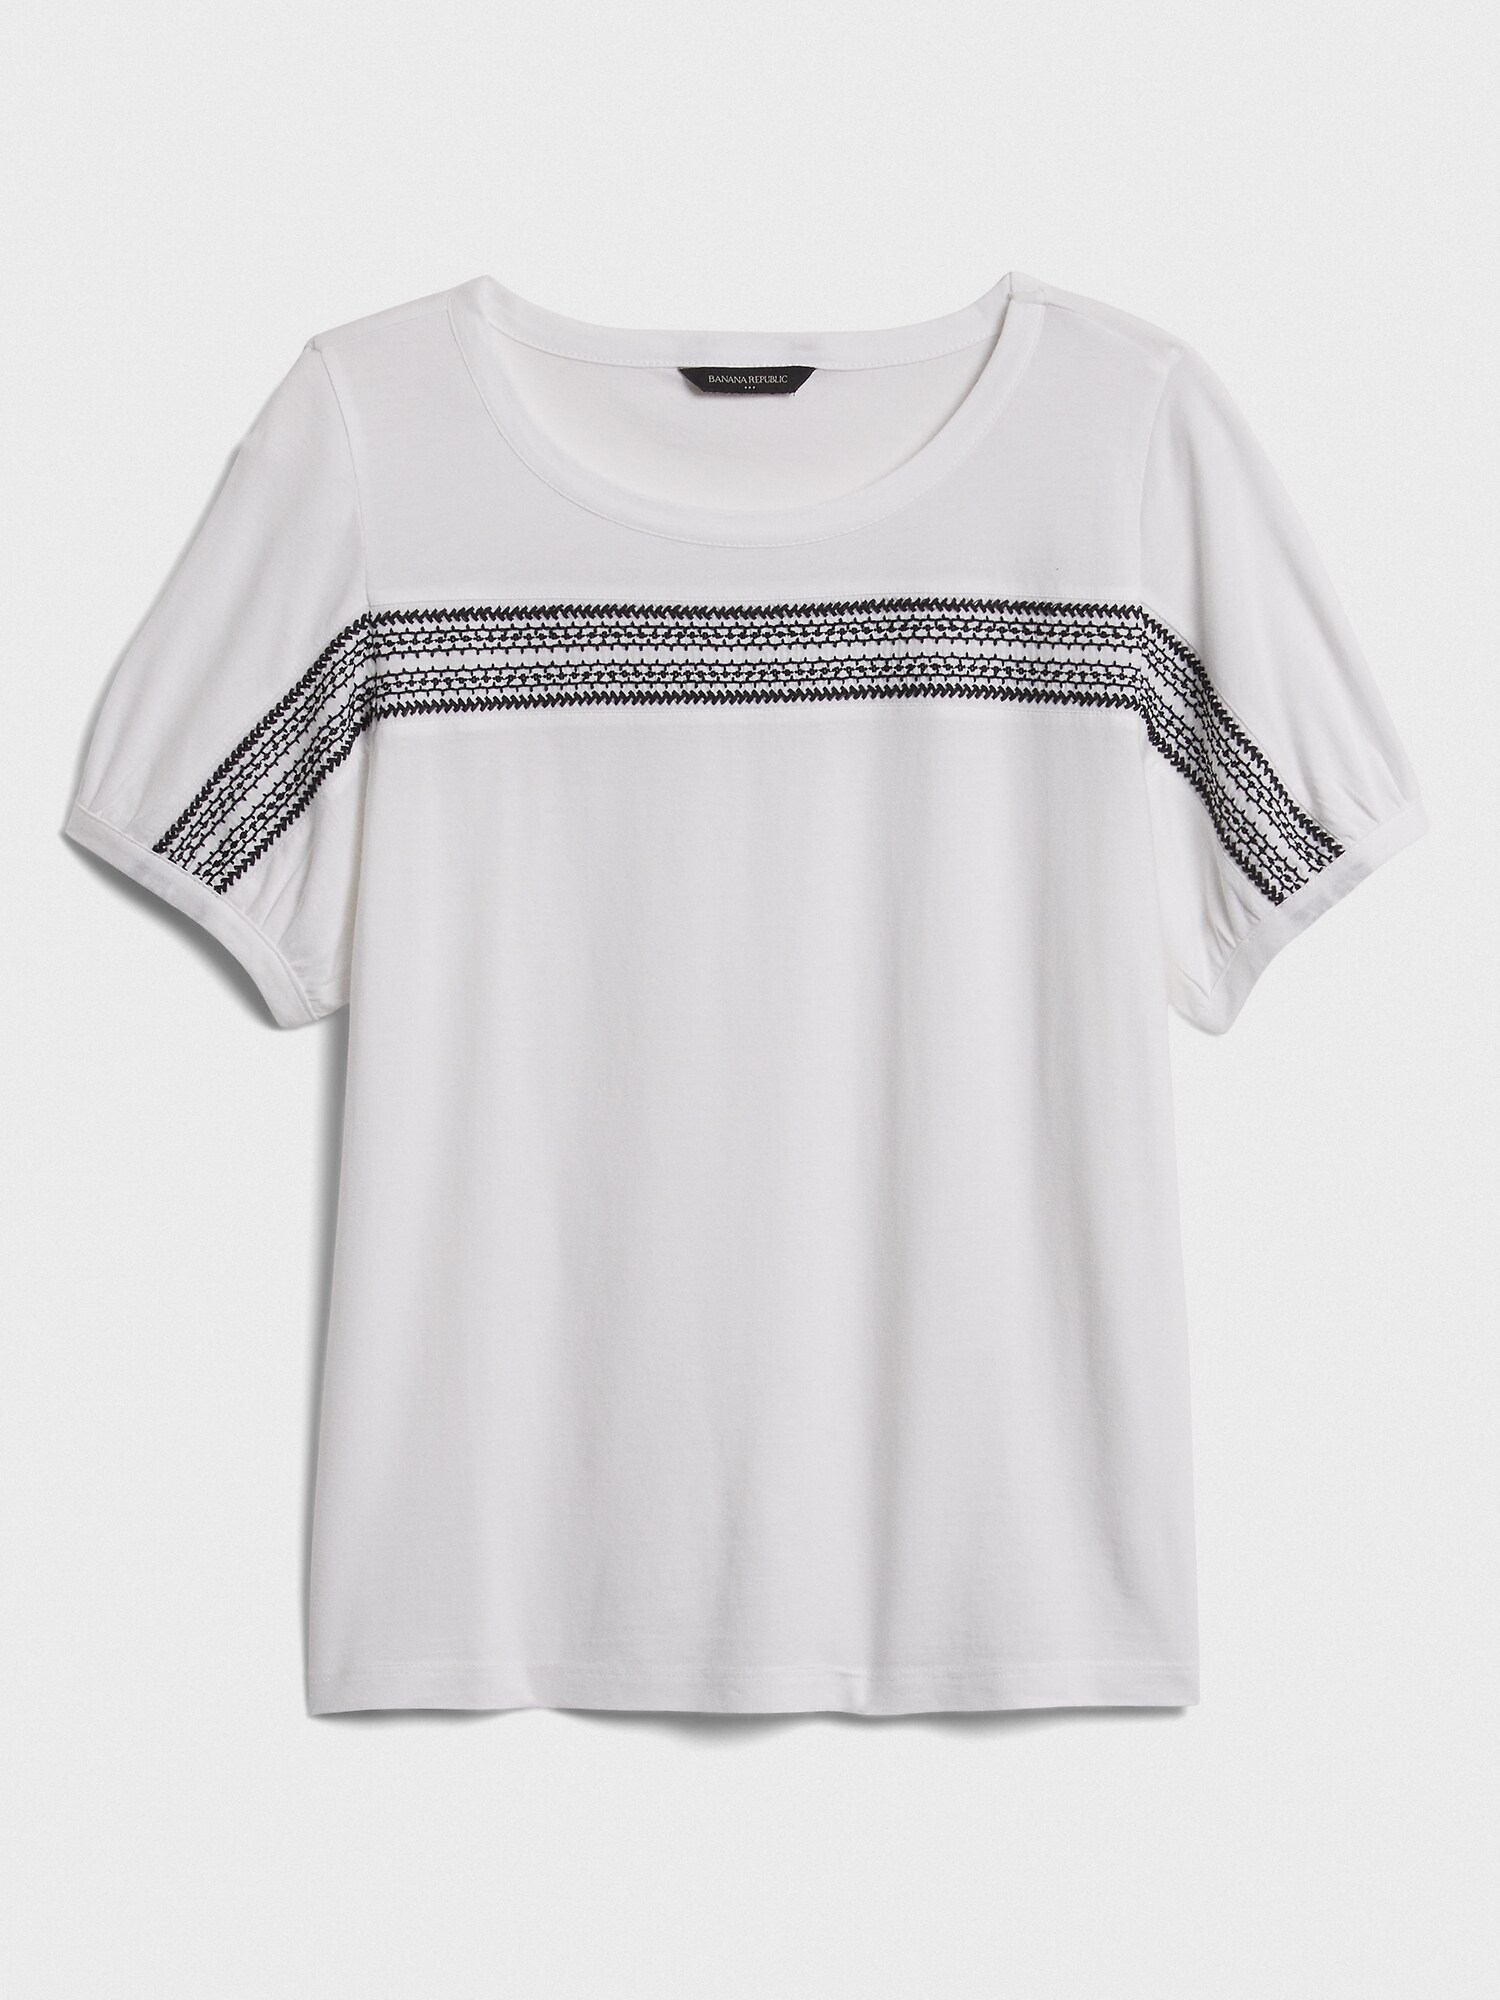 Embroidered Crew-Neck T-Shirt